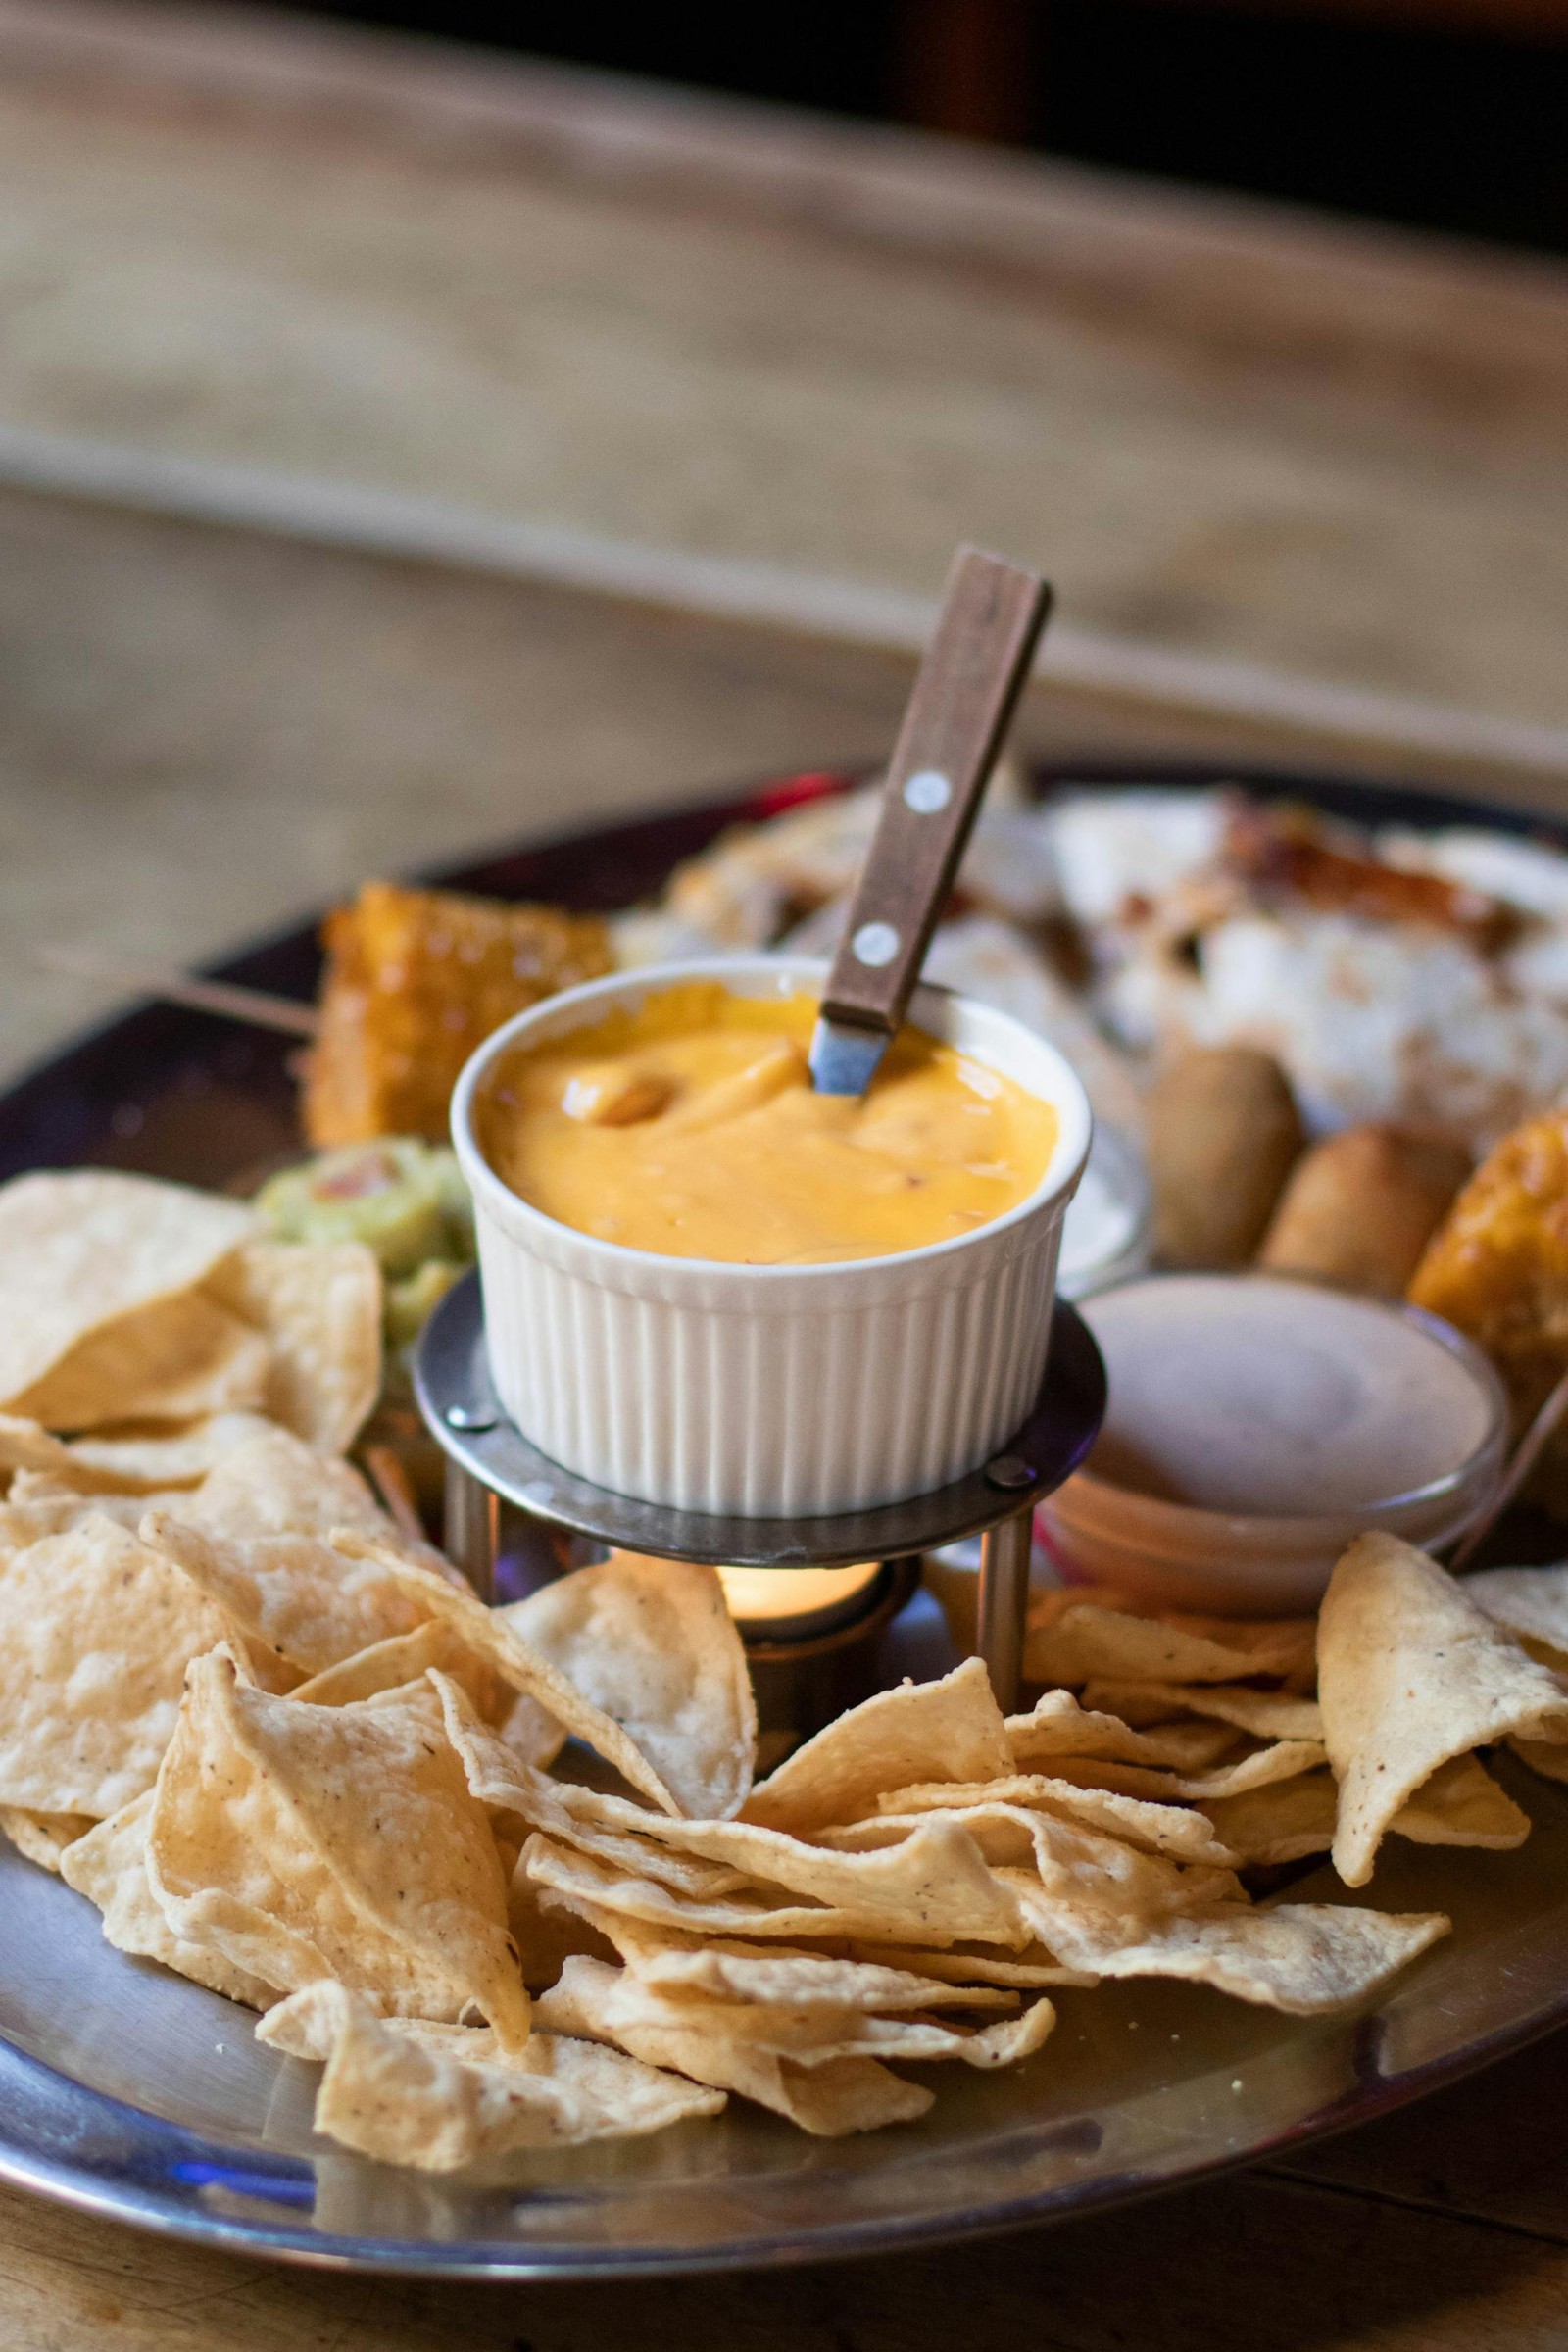 Cheese sauce in a ramekin over a little candle with a platter of tortilla chips and other appetizers.